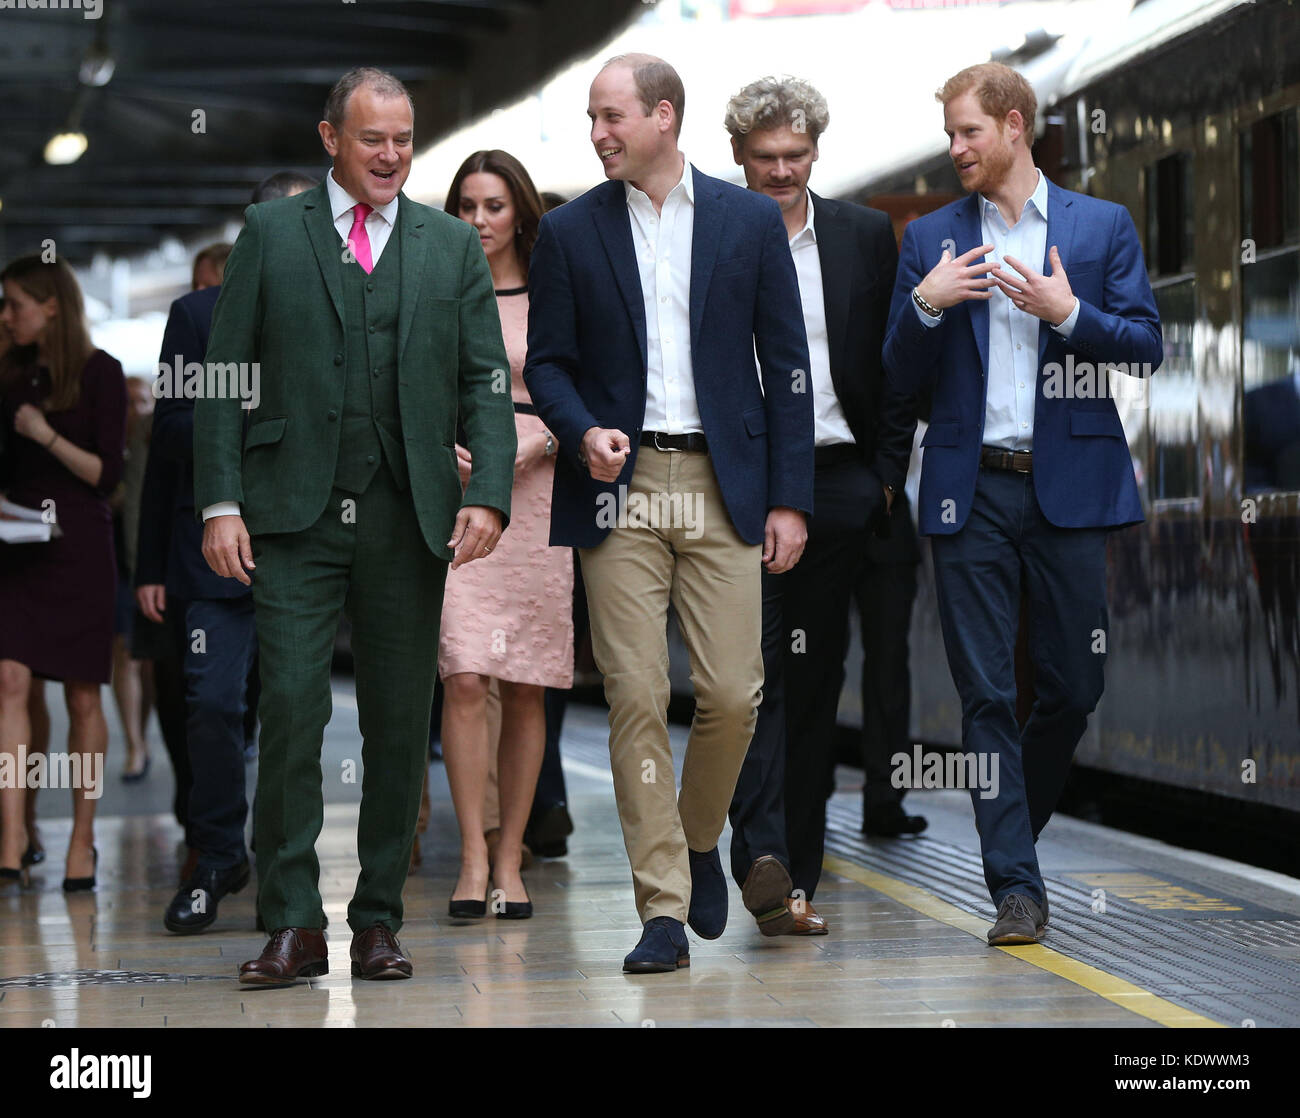 Actor Hugh Bonneville (left) walks with the Duke and Duchess of Cambridge, Simon Farnaby and Prince Harry as the arrive at Paddington Station in London, to join children from the charities they support and meet the cast and crew from the forthcoming film Paddington 2. Stock Photo